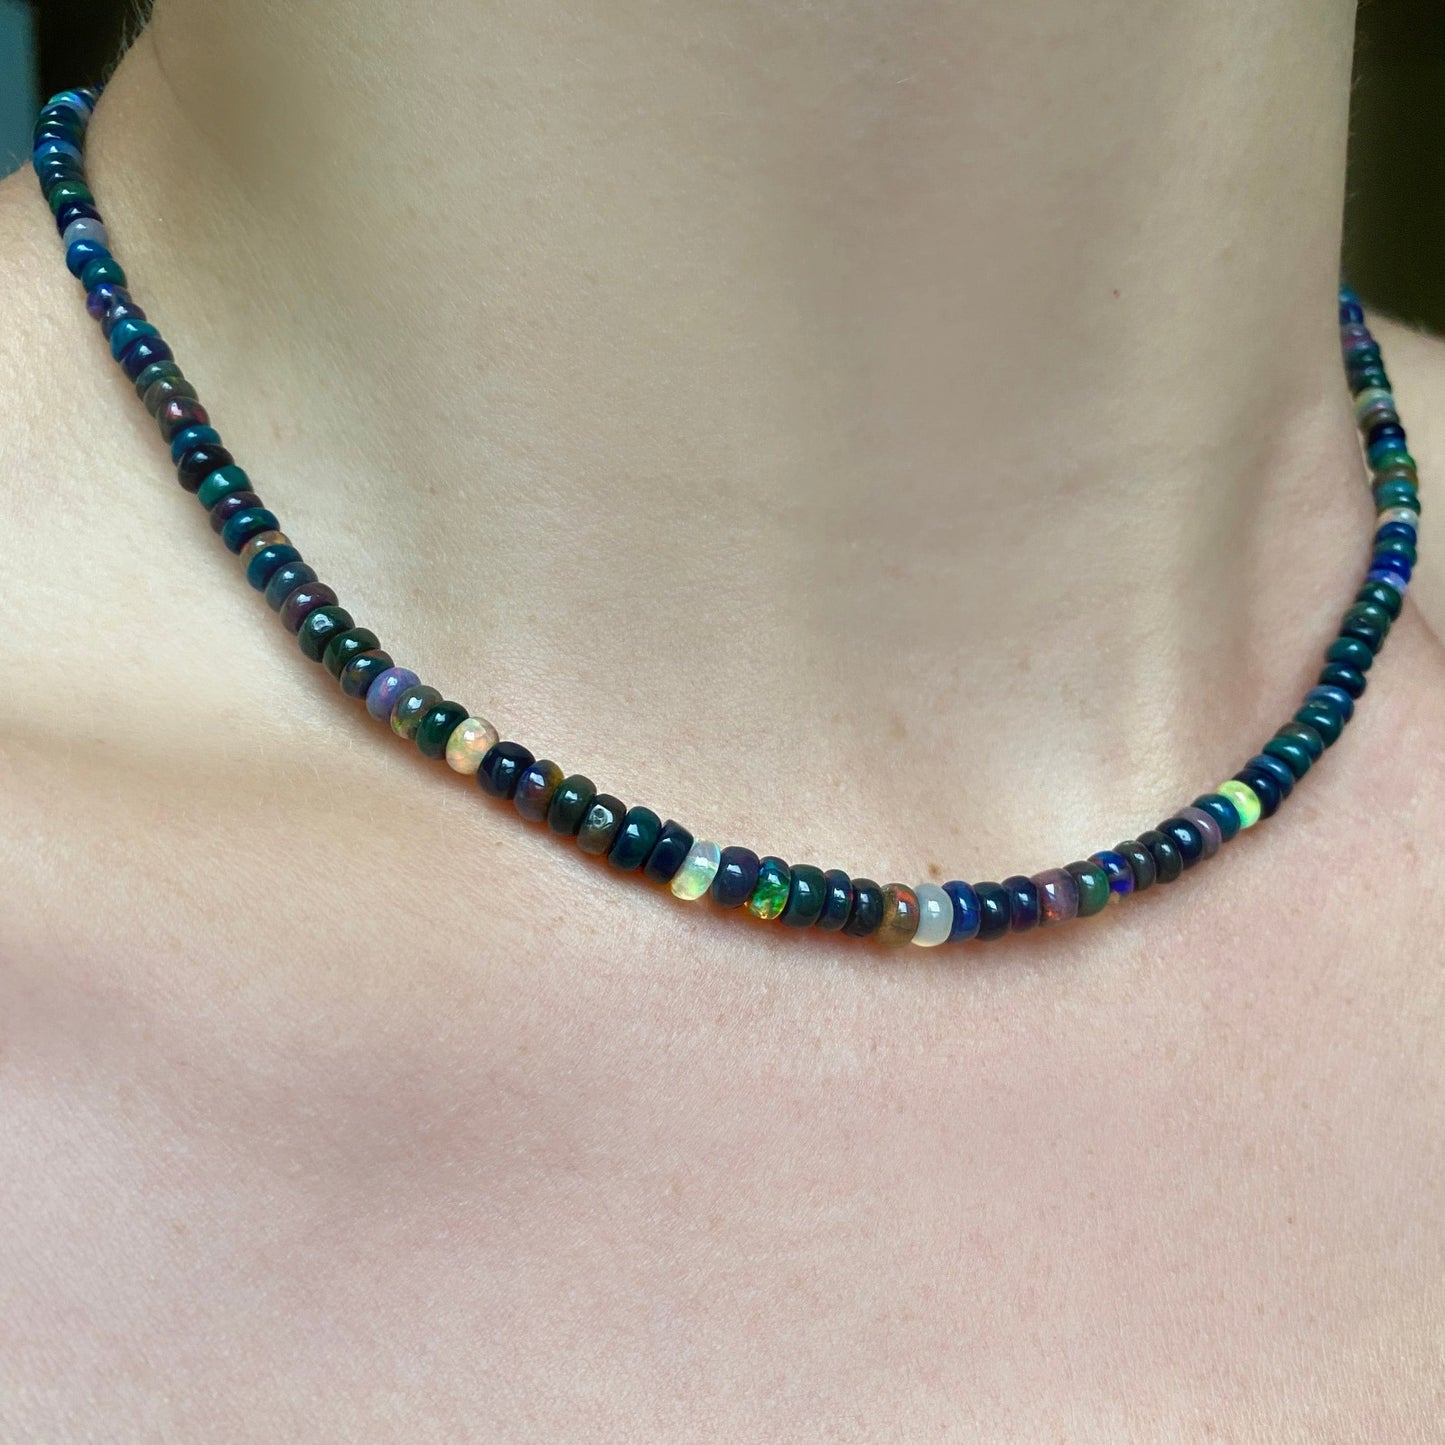 Shimmering beaded necklace made of smooth opal rondels in shades of black, dark green, navy, and clear on a slim gold lobster clasp. 